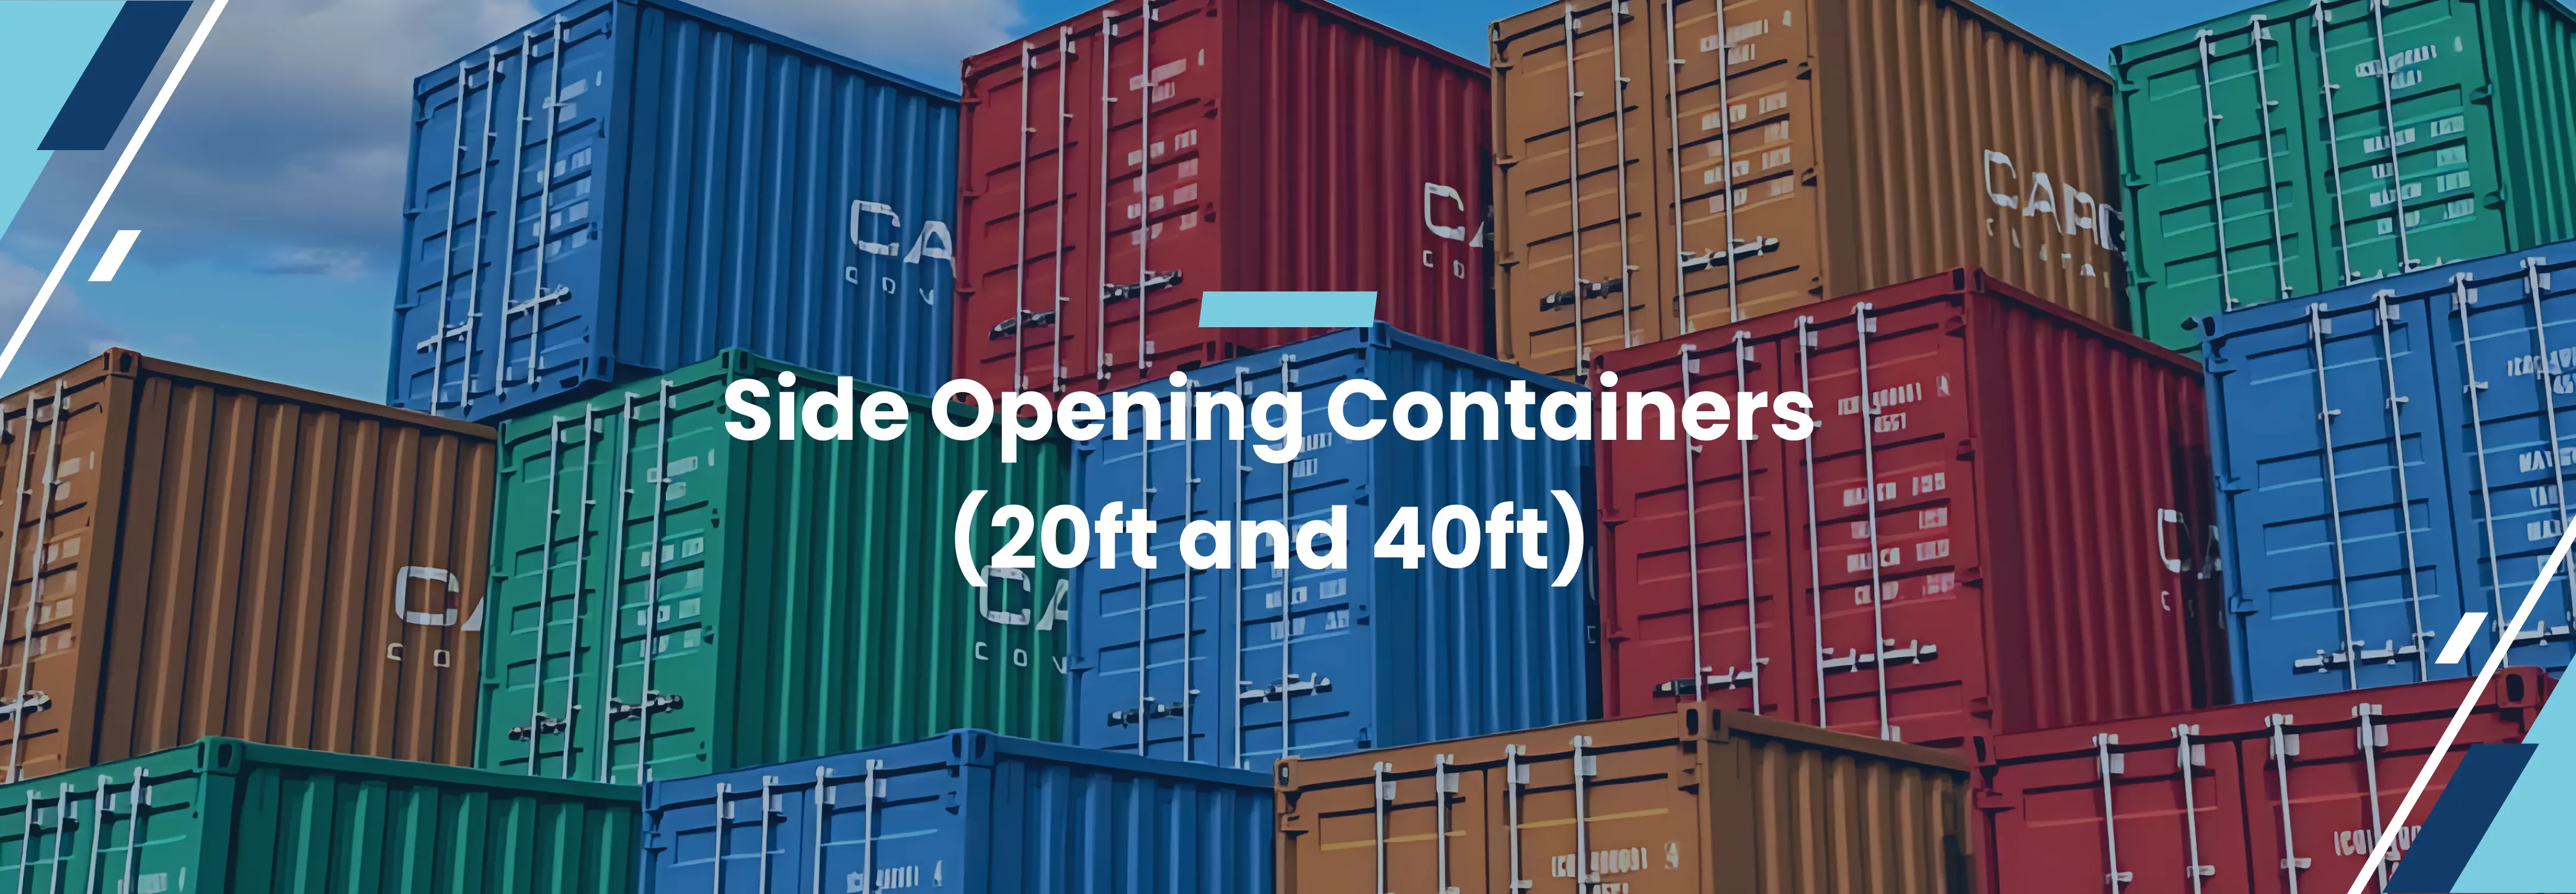 Banner of Side Opening Containers